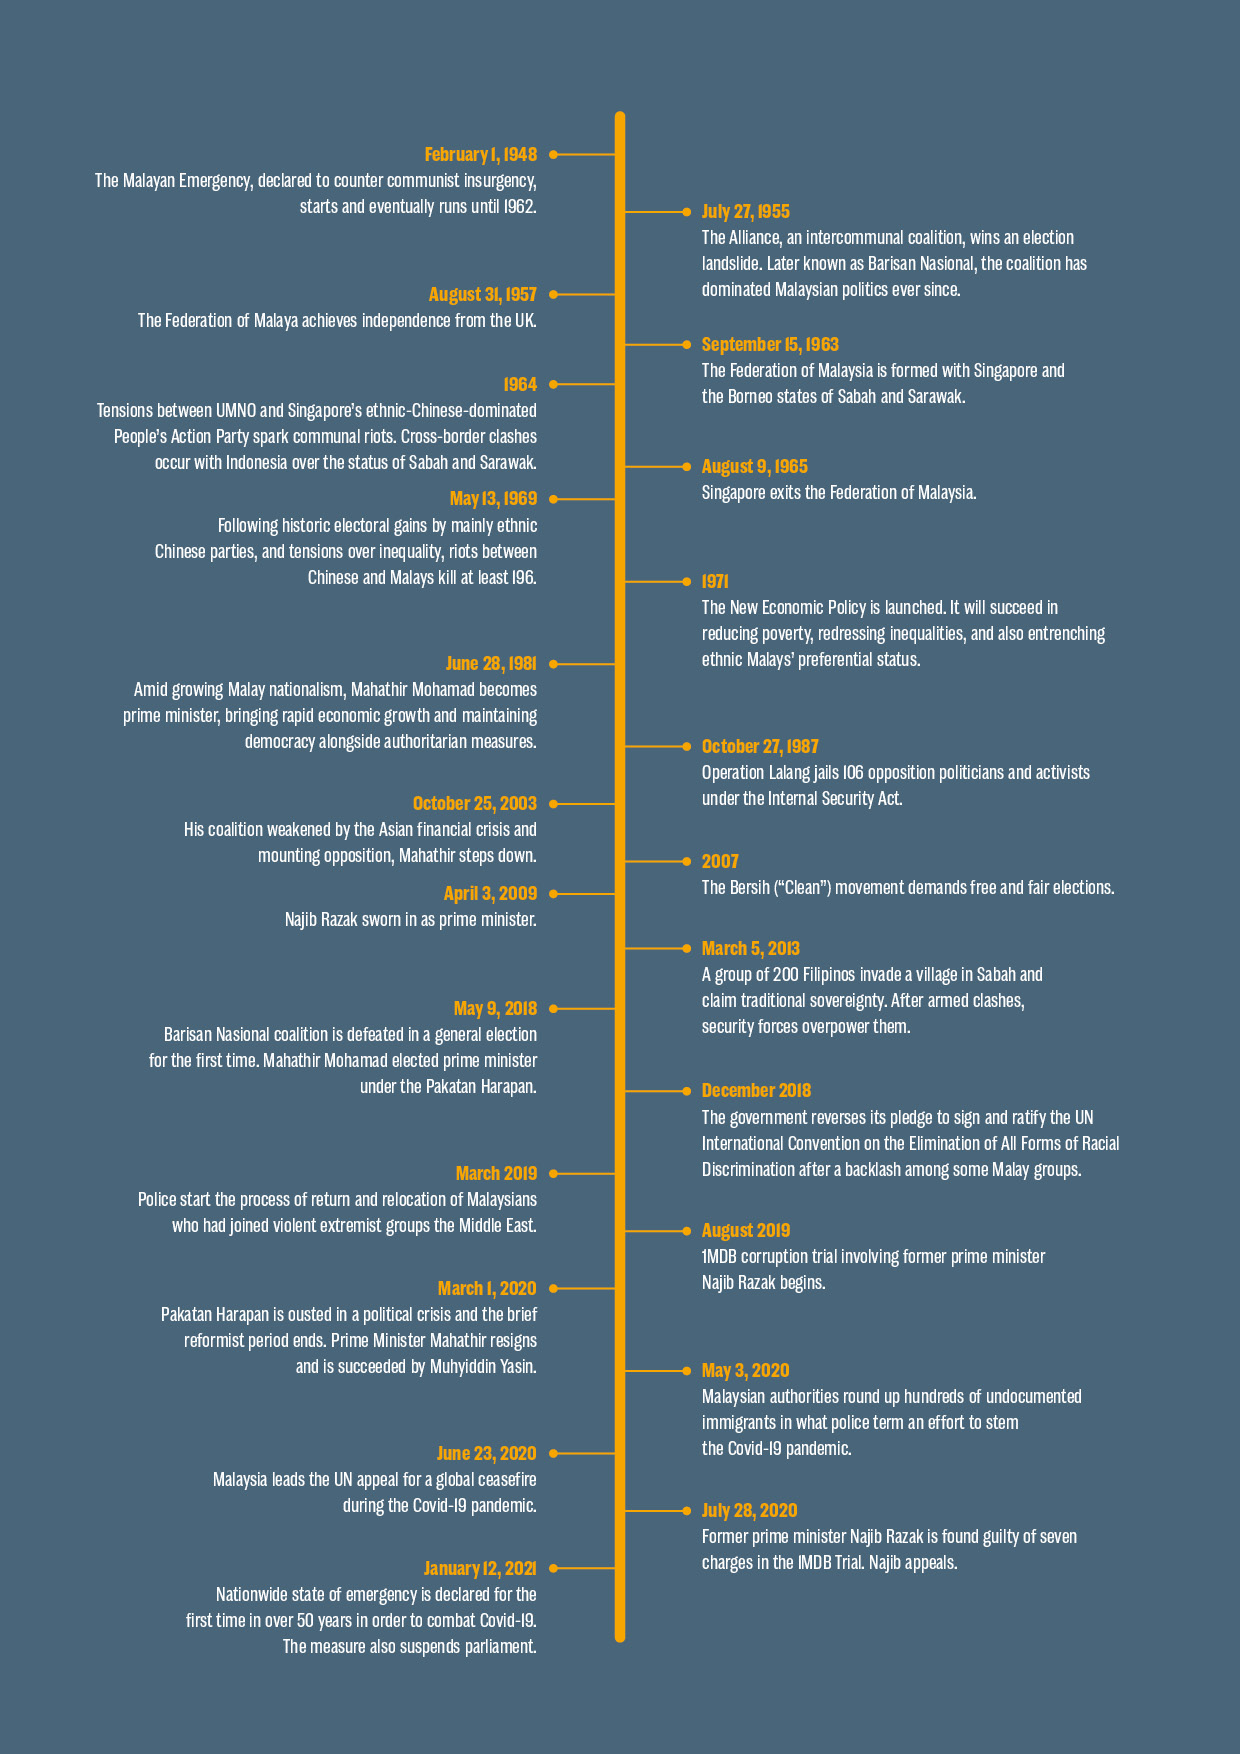 Timeline of conflict and violence in Malaysia